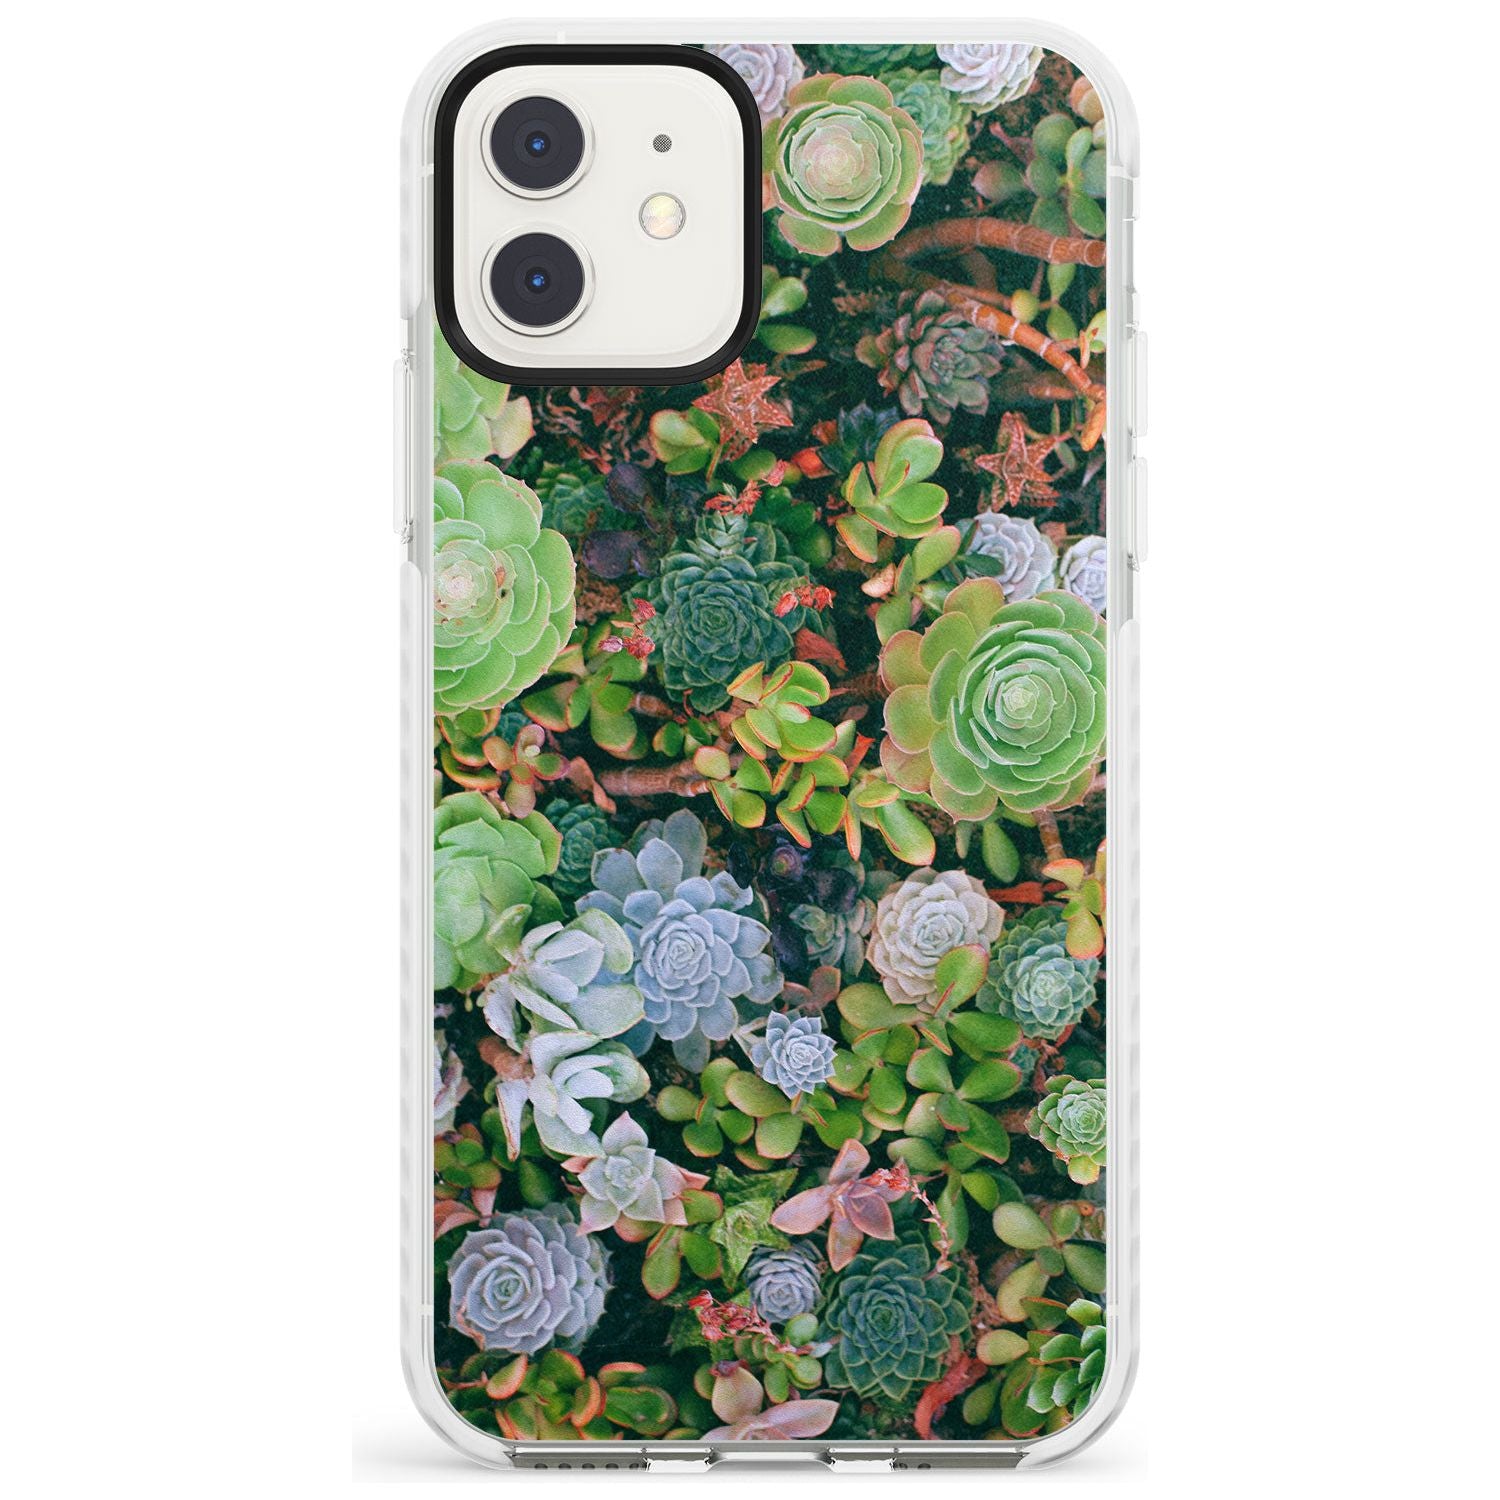 Colourful Succulents Photograph Impact Phone Case for iPhone 11